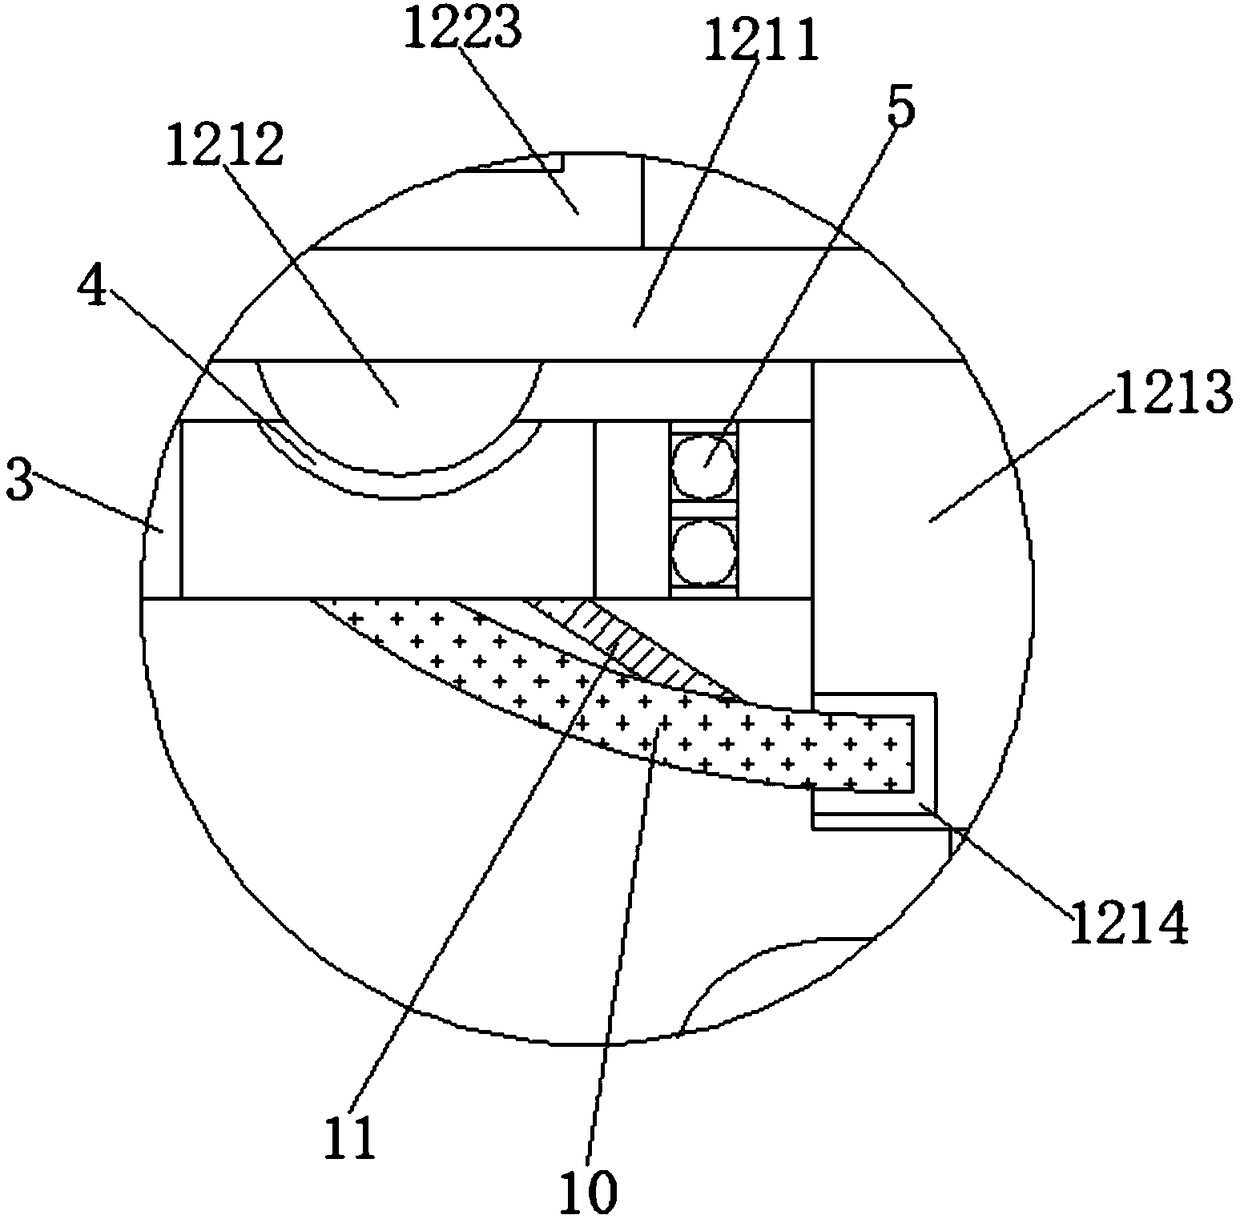 Kinetic friction force-based kernel removing device for deep processing of apples